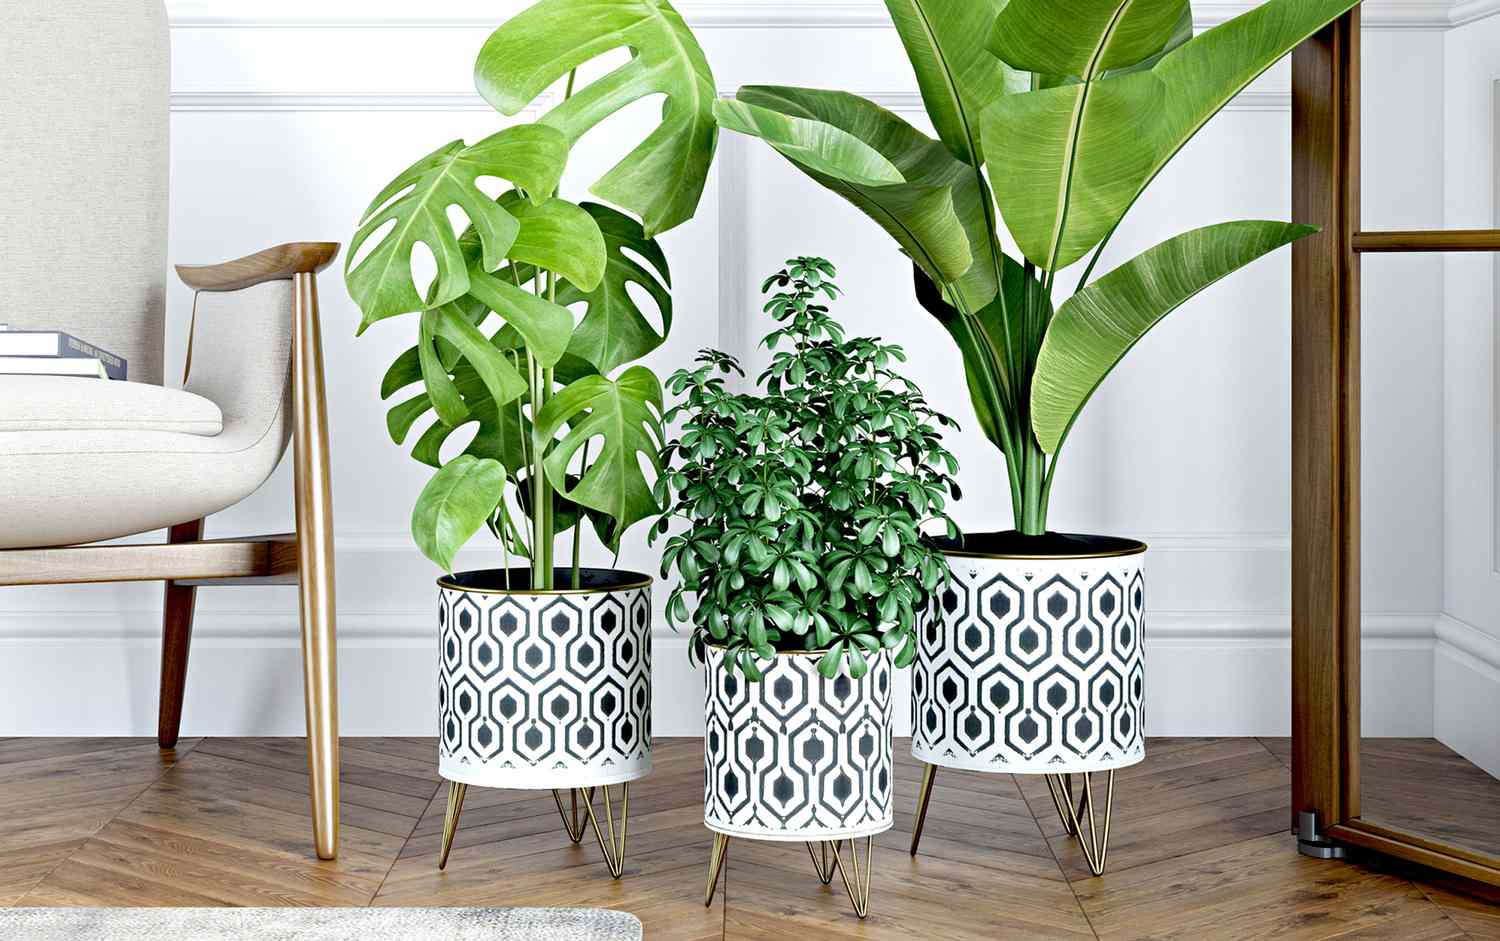 Black and white textured indoor planters with plants